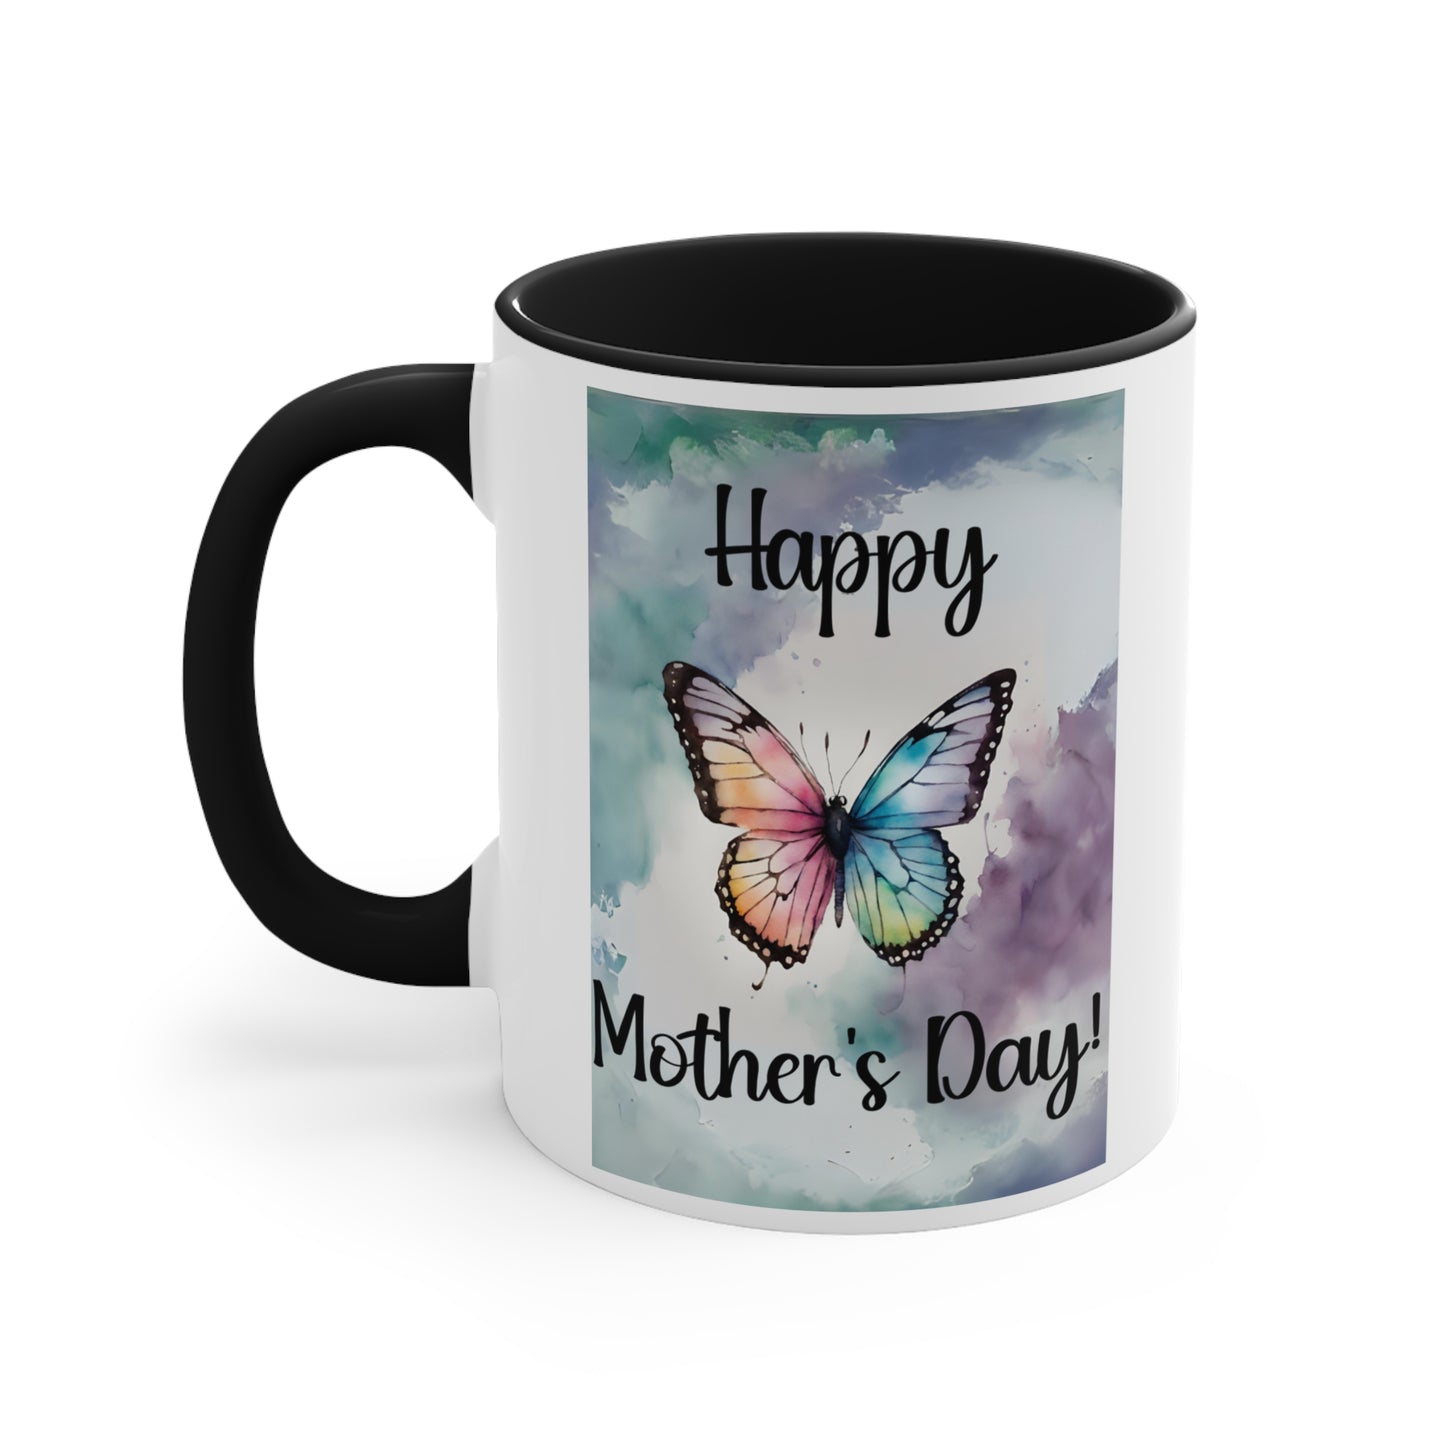 Watercolor Mother's Day Mug with Butterfly, 11oz